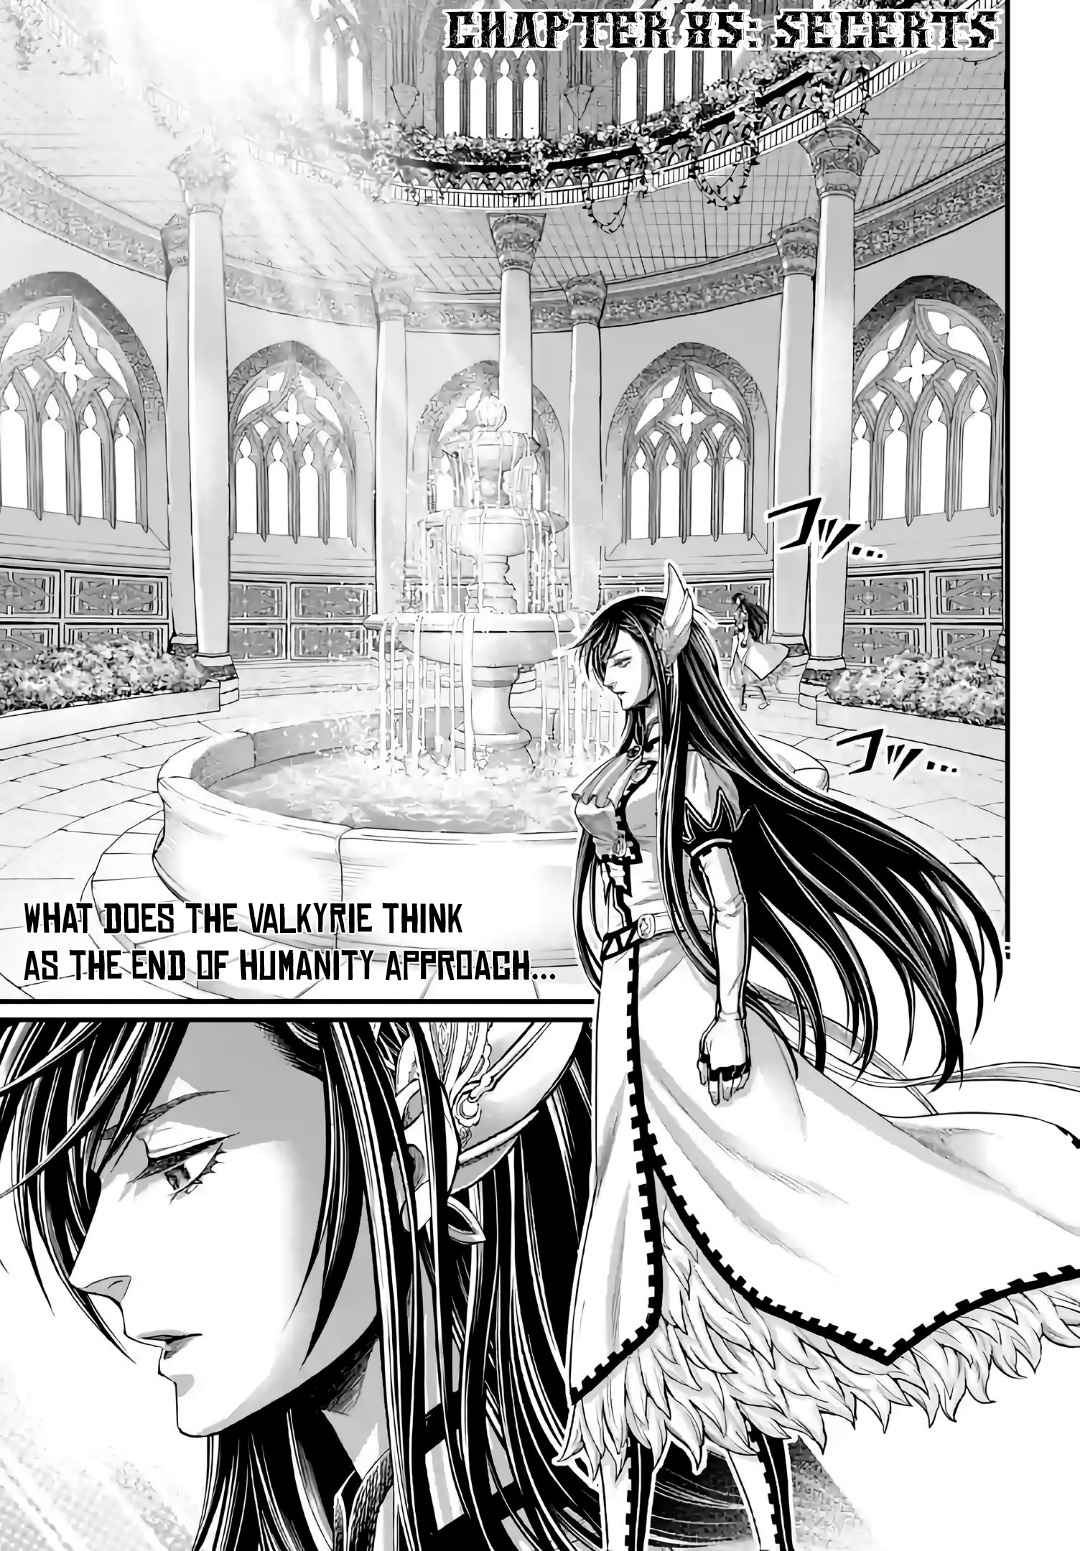 Record Of Ragnarok Chapter 85: Serects - Picture 1